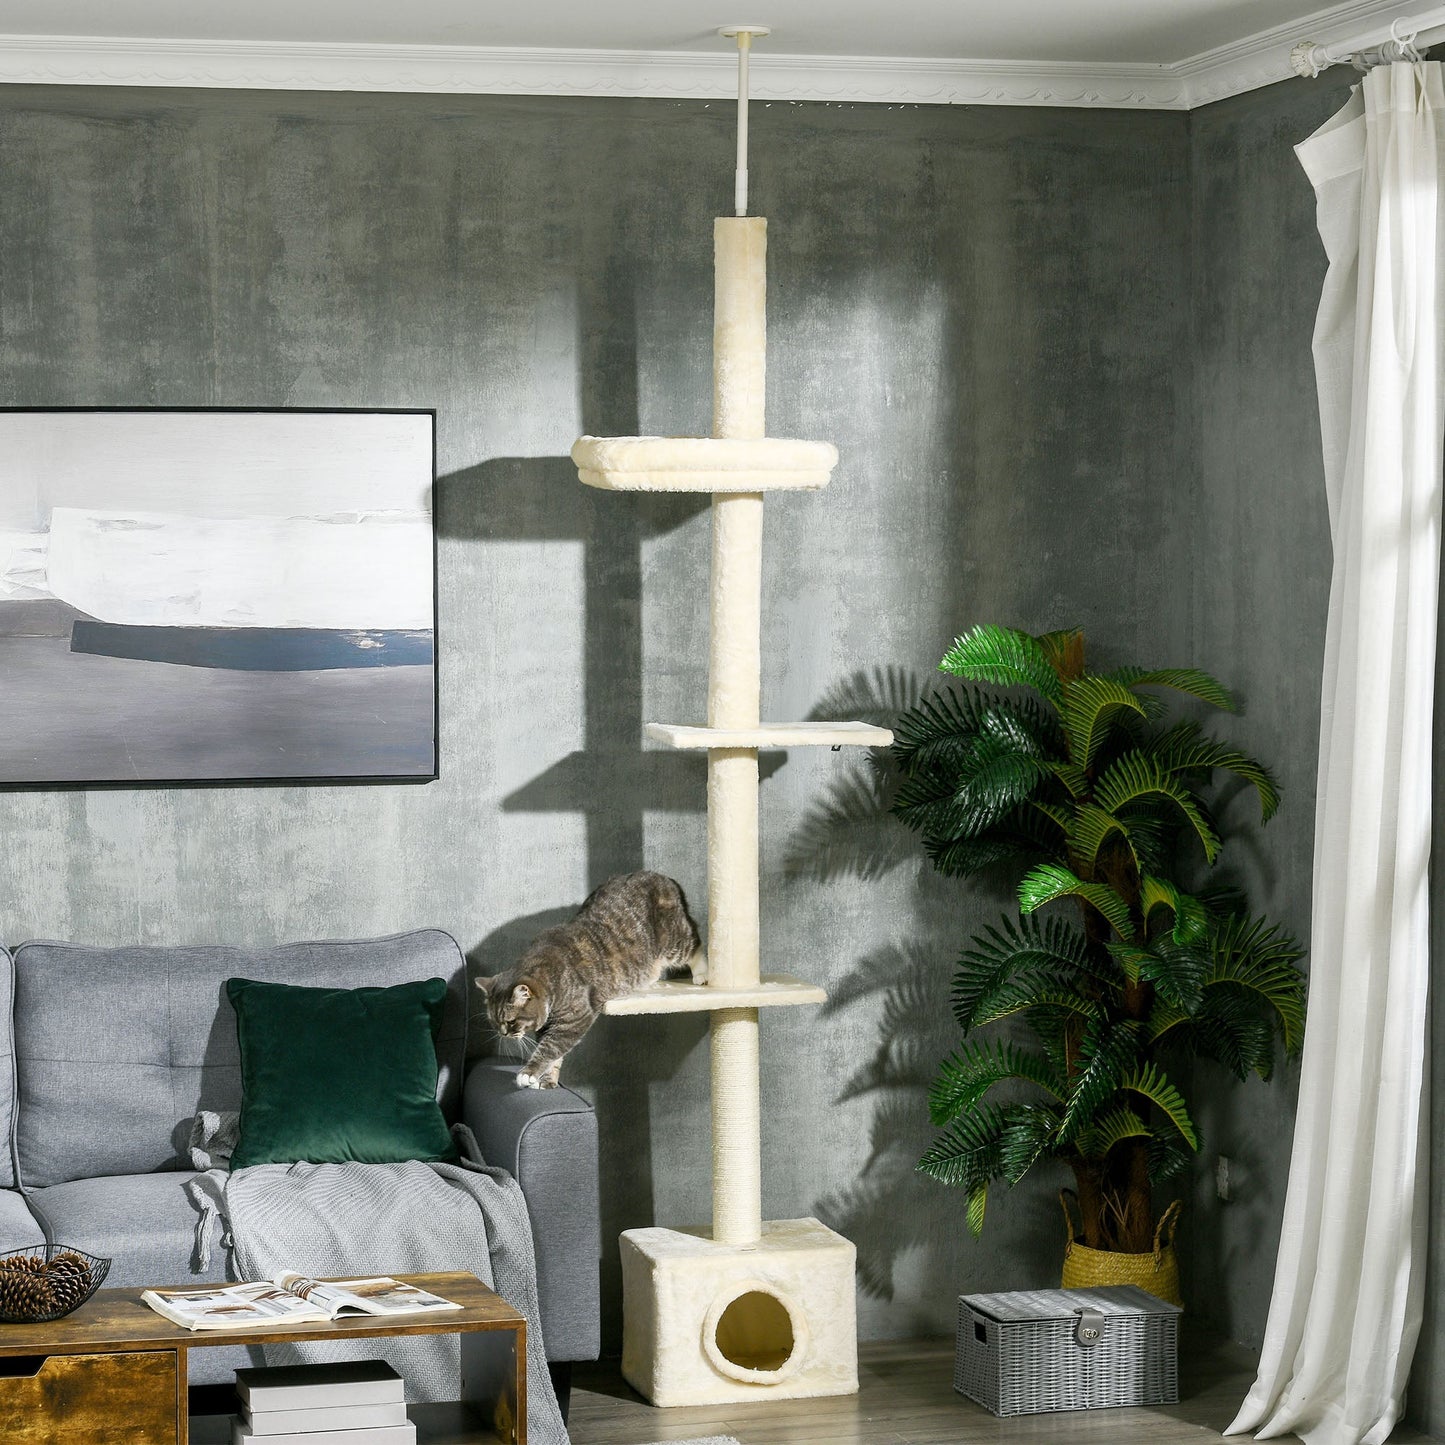 Floor to Ceiling Cat Tree with Scratching Post for Indoor Cats, Adjustable Height Cat Tower (91-102 Inches) with House, Bed, Beige at Gallery Canada